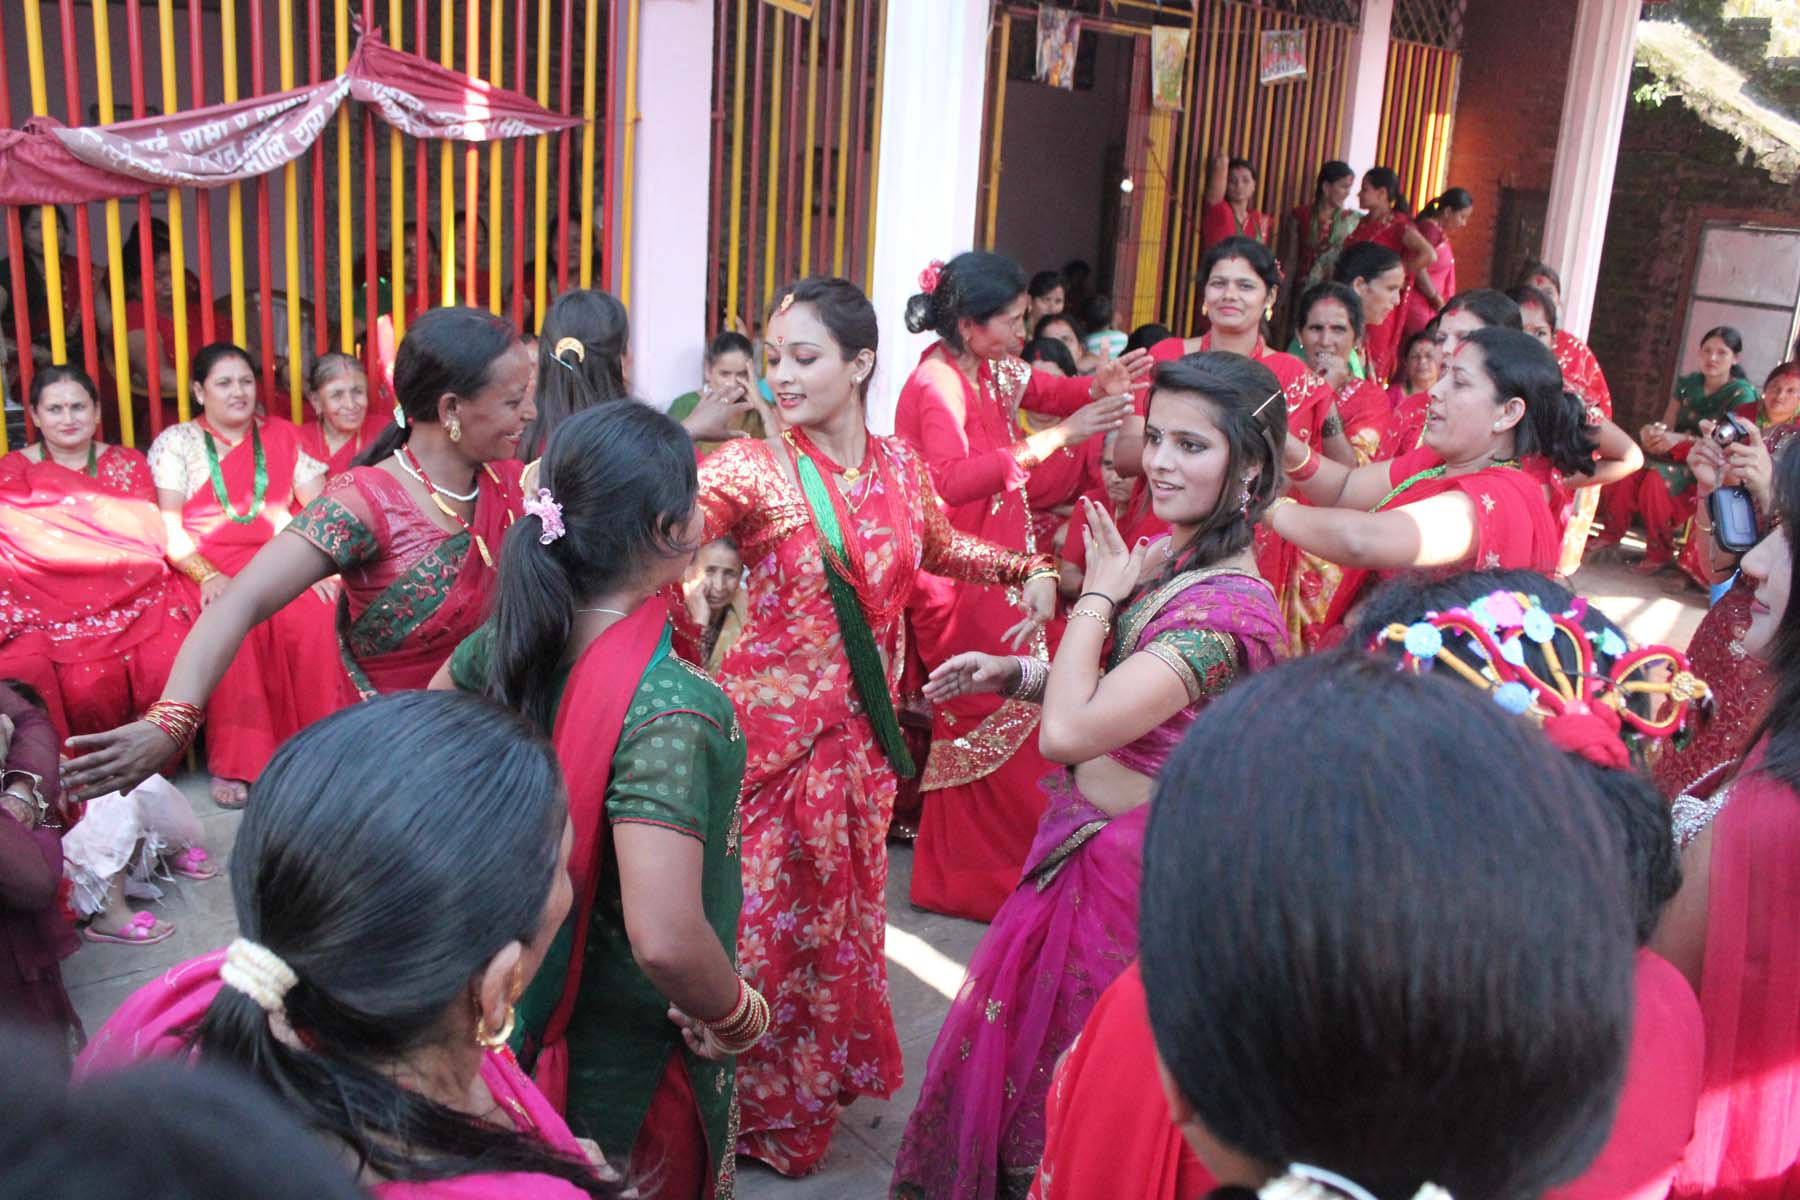 Kathmandu District Administration Office urges to celebrate Teej in decent, disciplined way